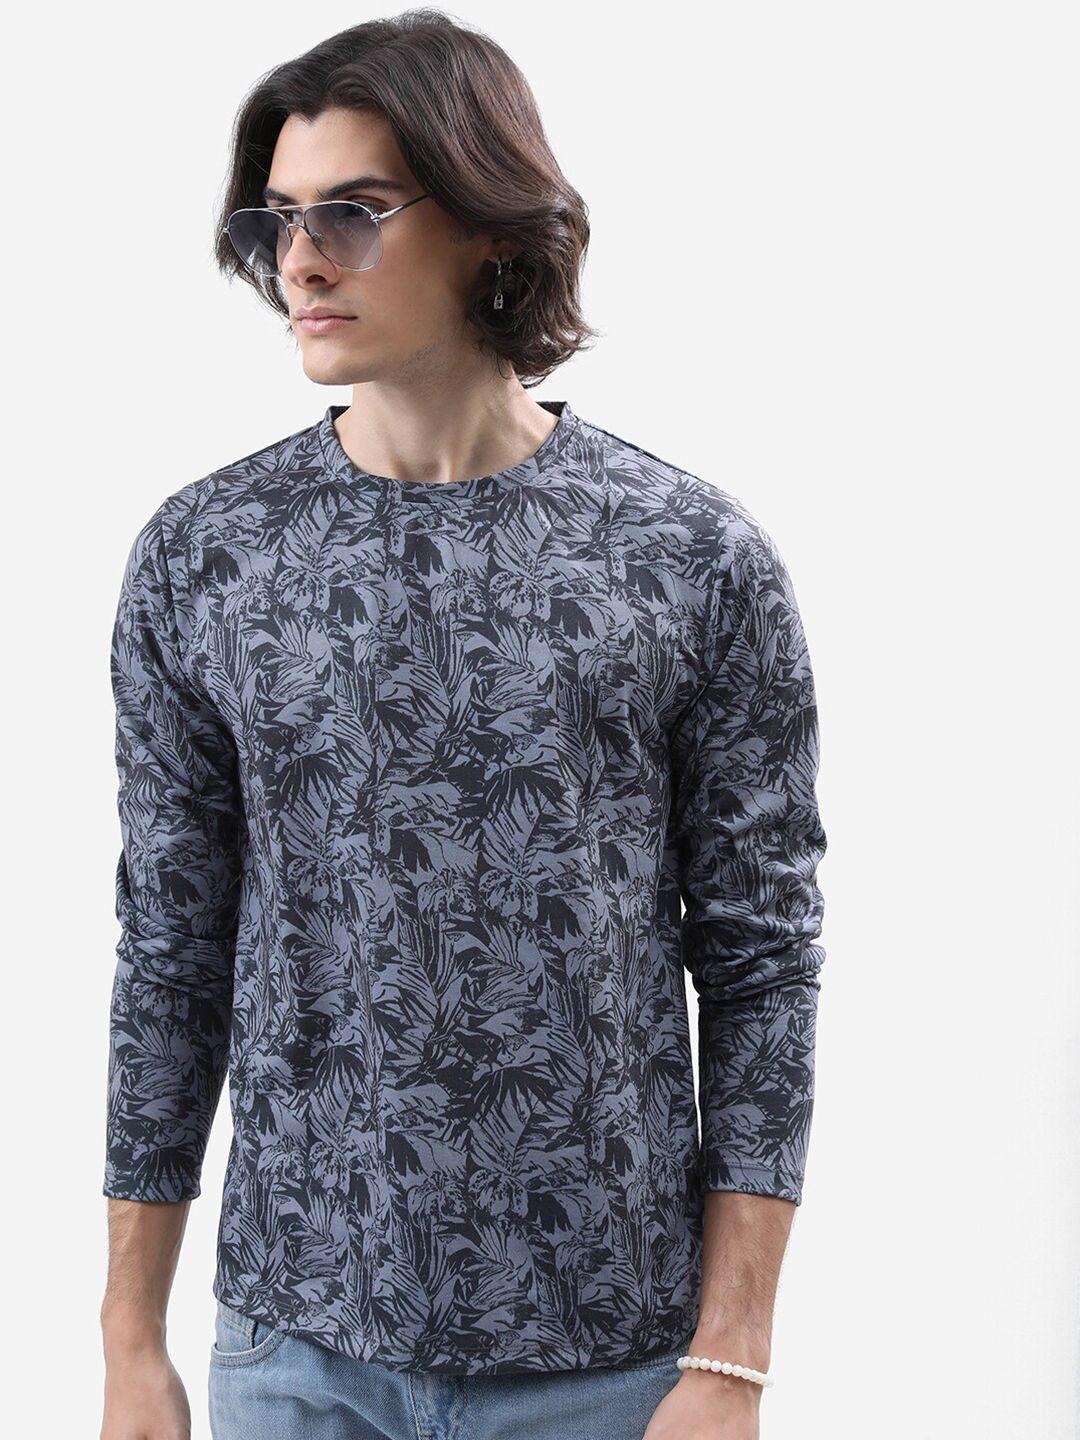 highlander grey floral printed relaxed fit t-shirt